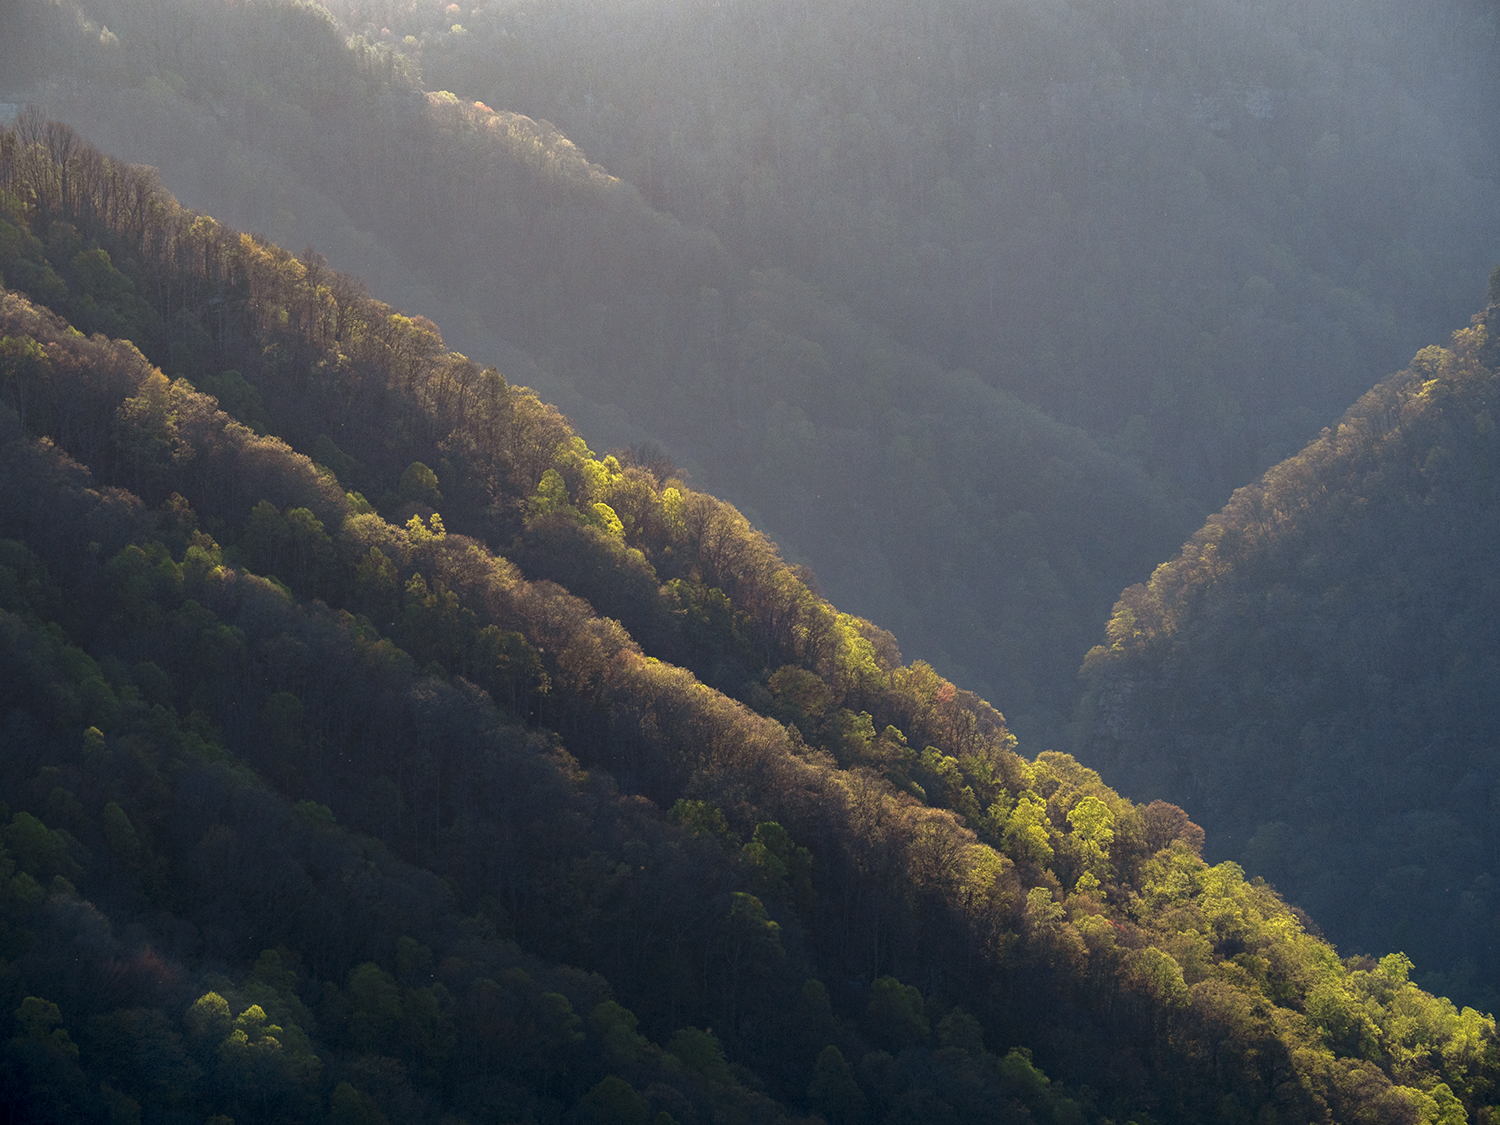 New River Gorge walls covered in backlit trees in spring time